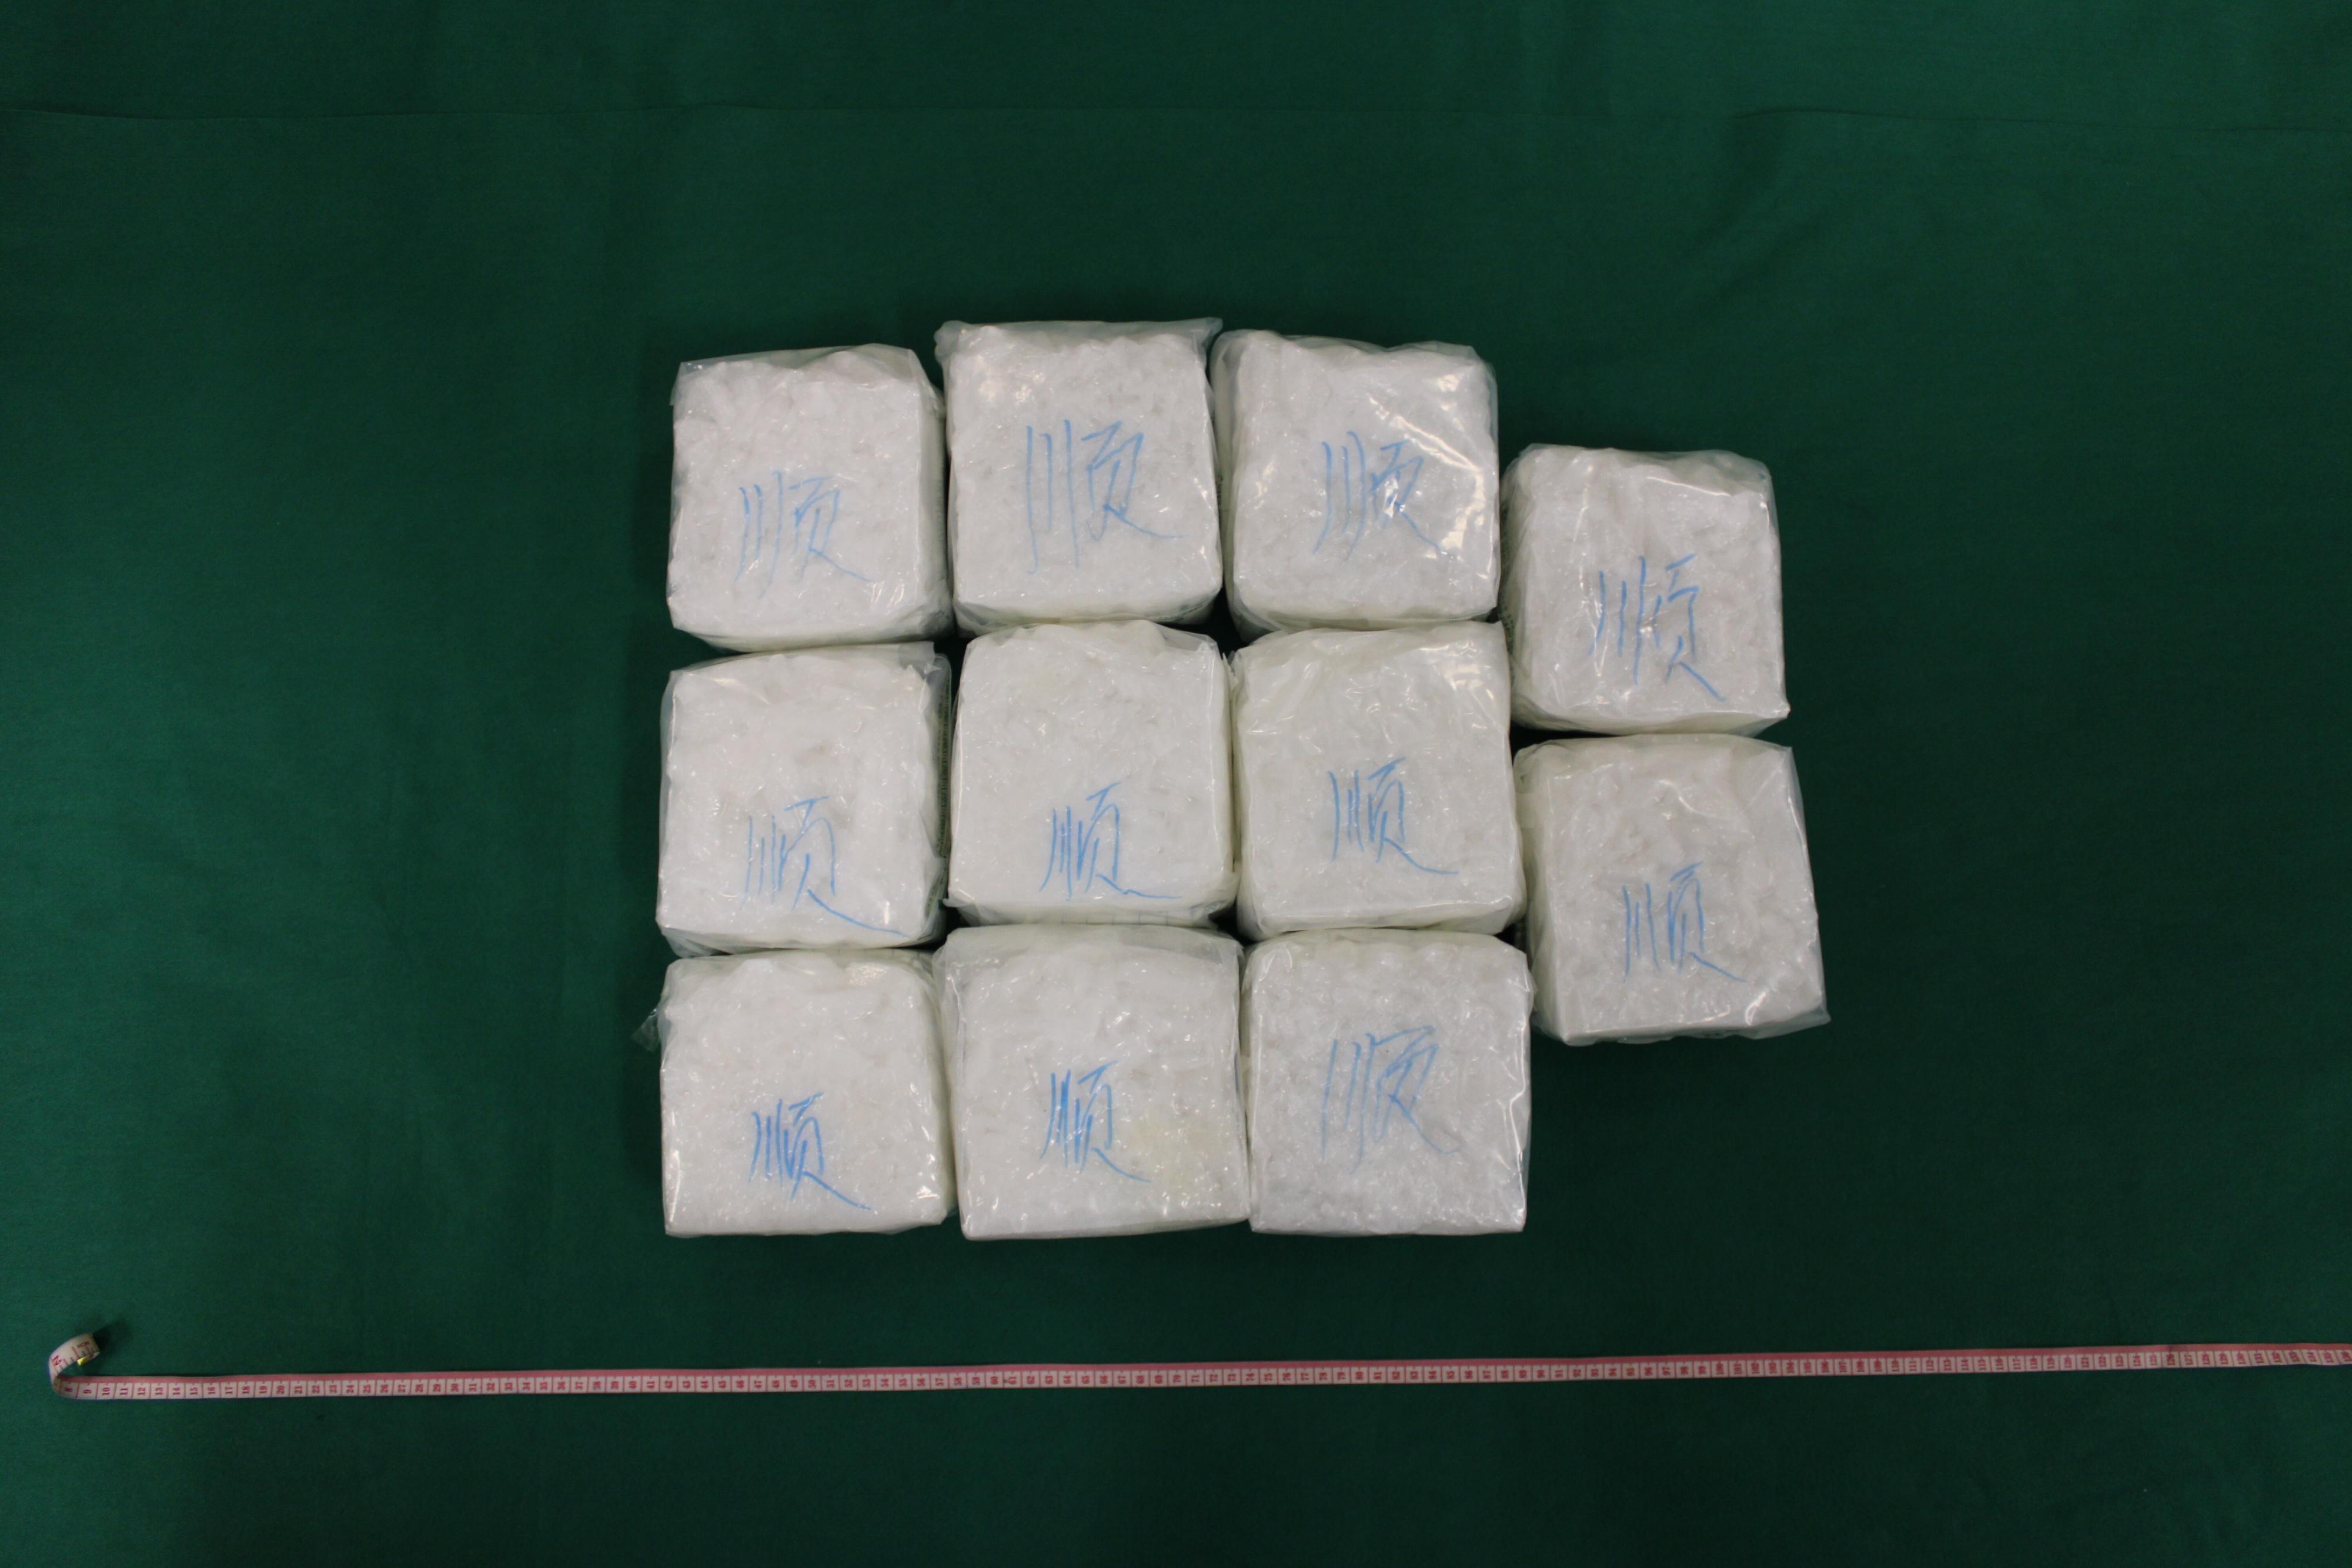 Hong Kong Customs yesterday (September 28) seized about 11 kilograms of suspected methamphetamine in Sheung Shui with an estimated market value of about $6.7 million. Photo shows the suspected methamphetamine seized.